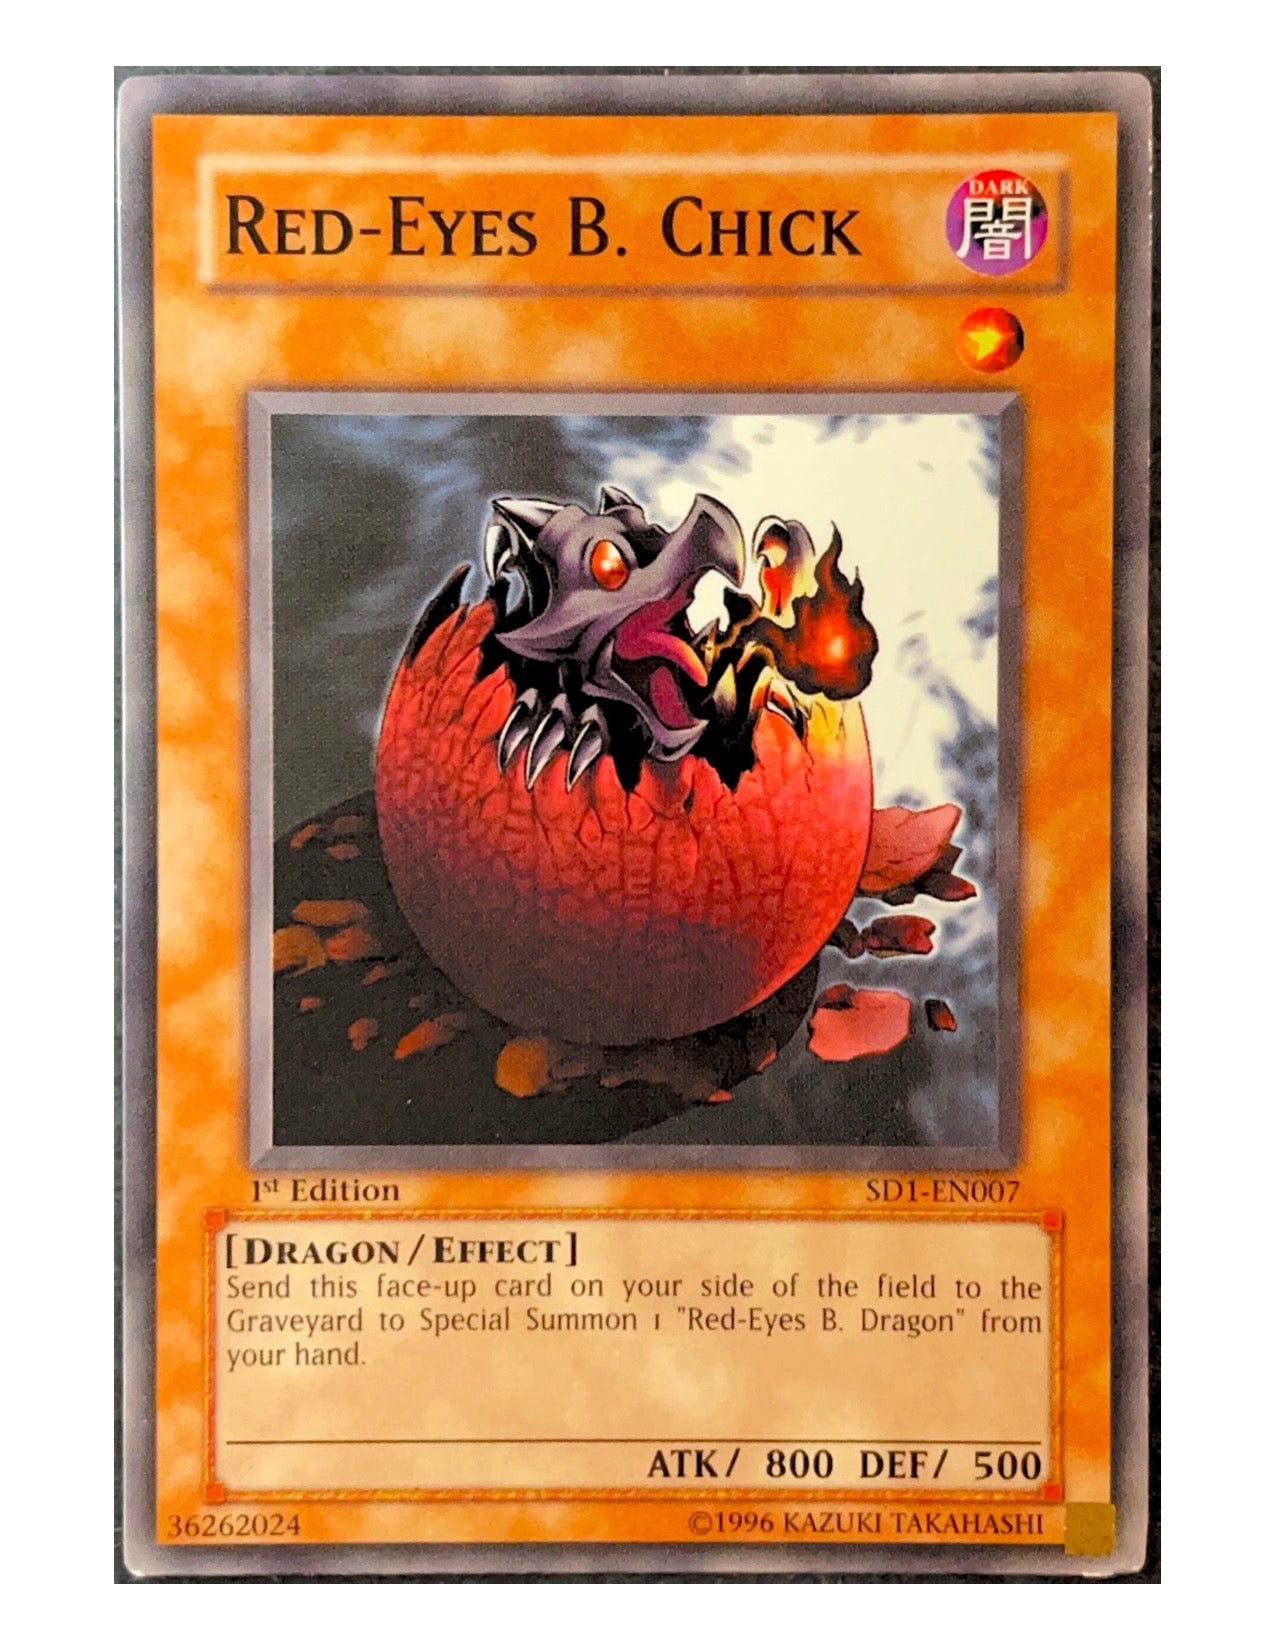 Red-Eyes B. Chick SD1-EN007 Common - 1st Edition